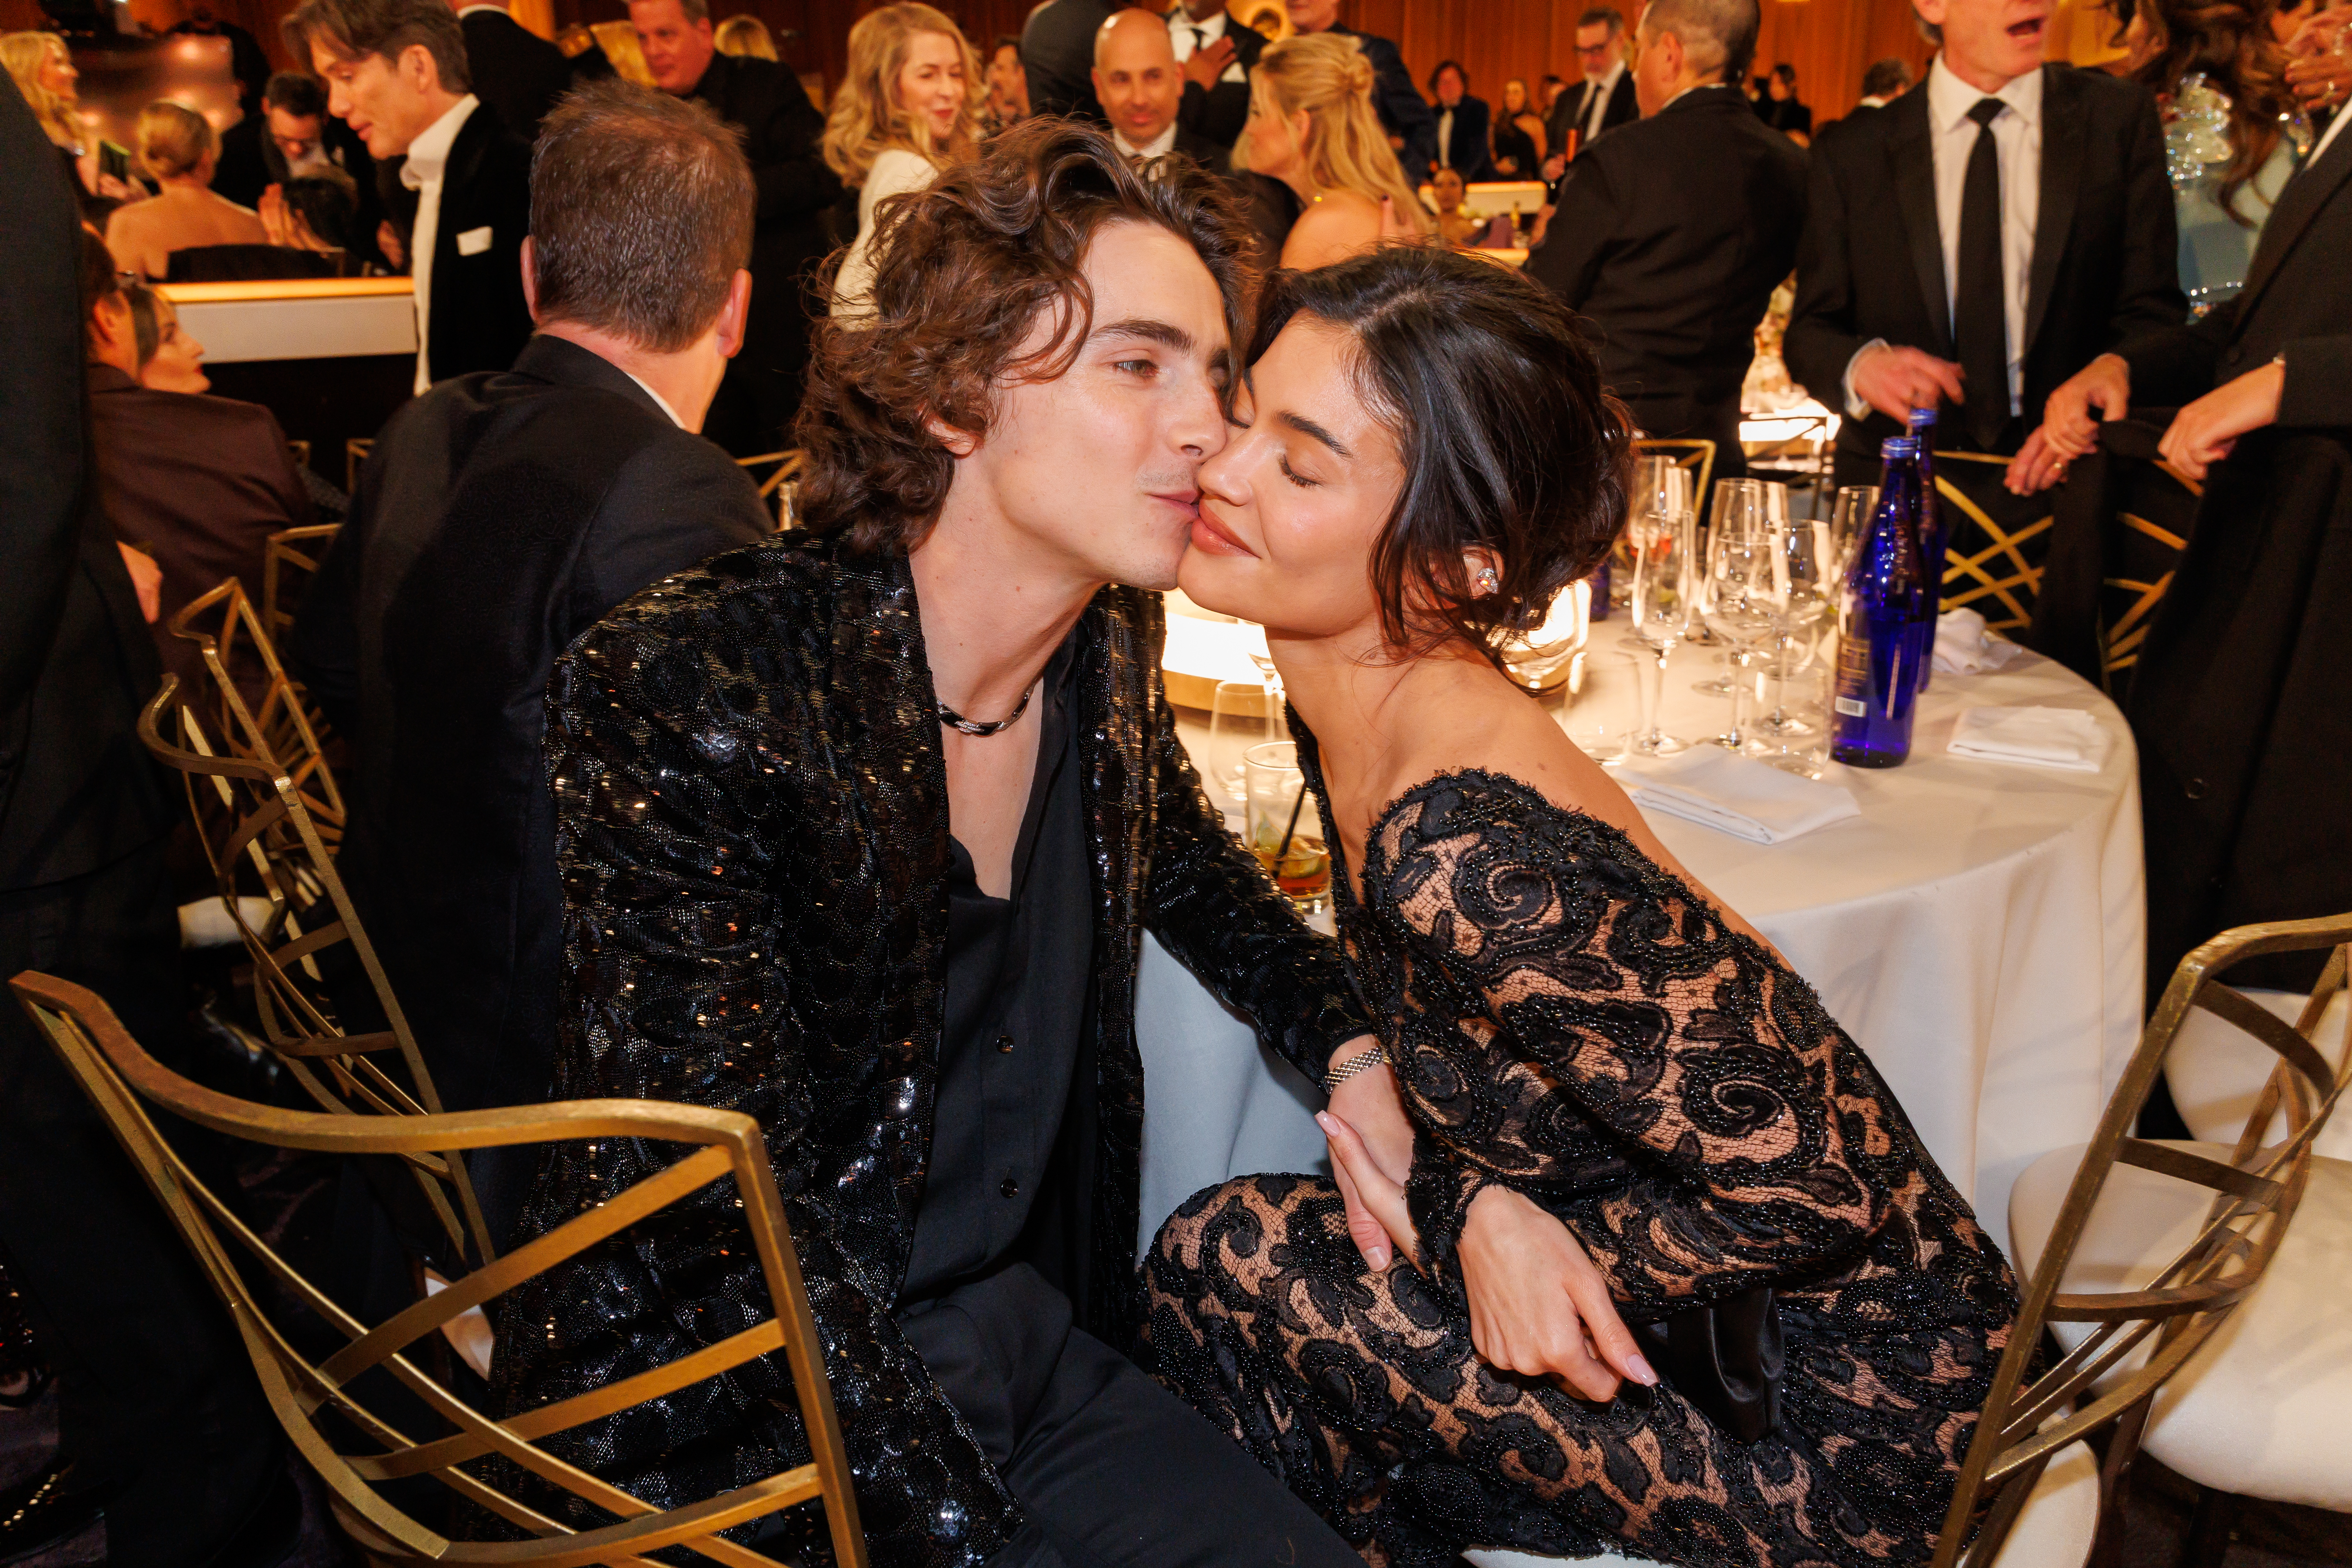 Rumors have been circulating that Kylie and Timothée split after fans noticed them spending more time apart